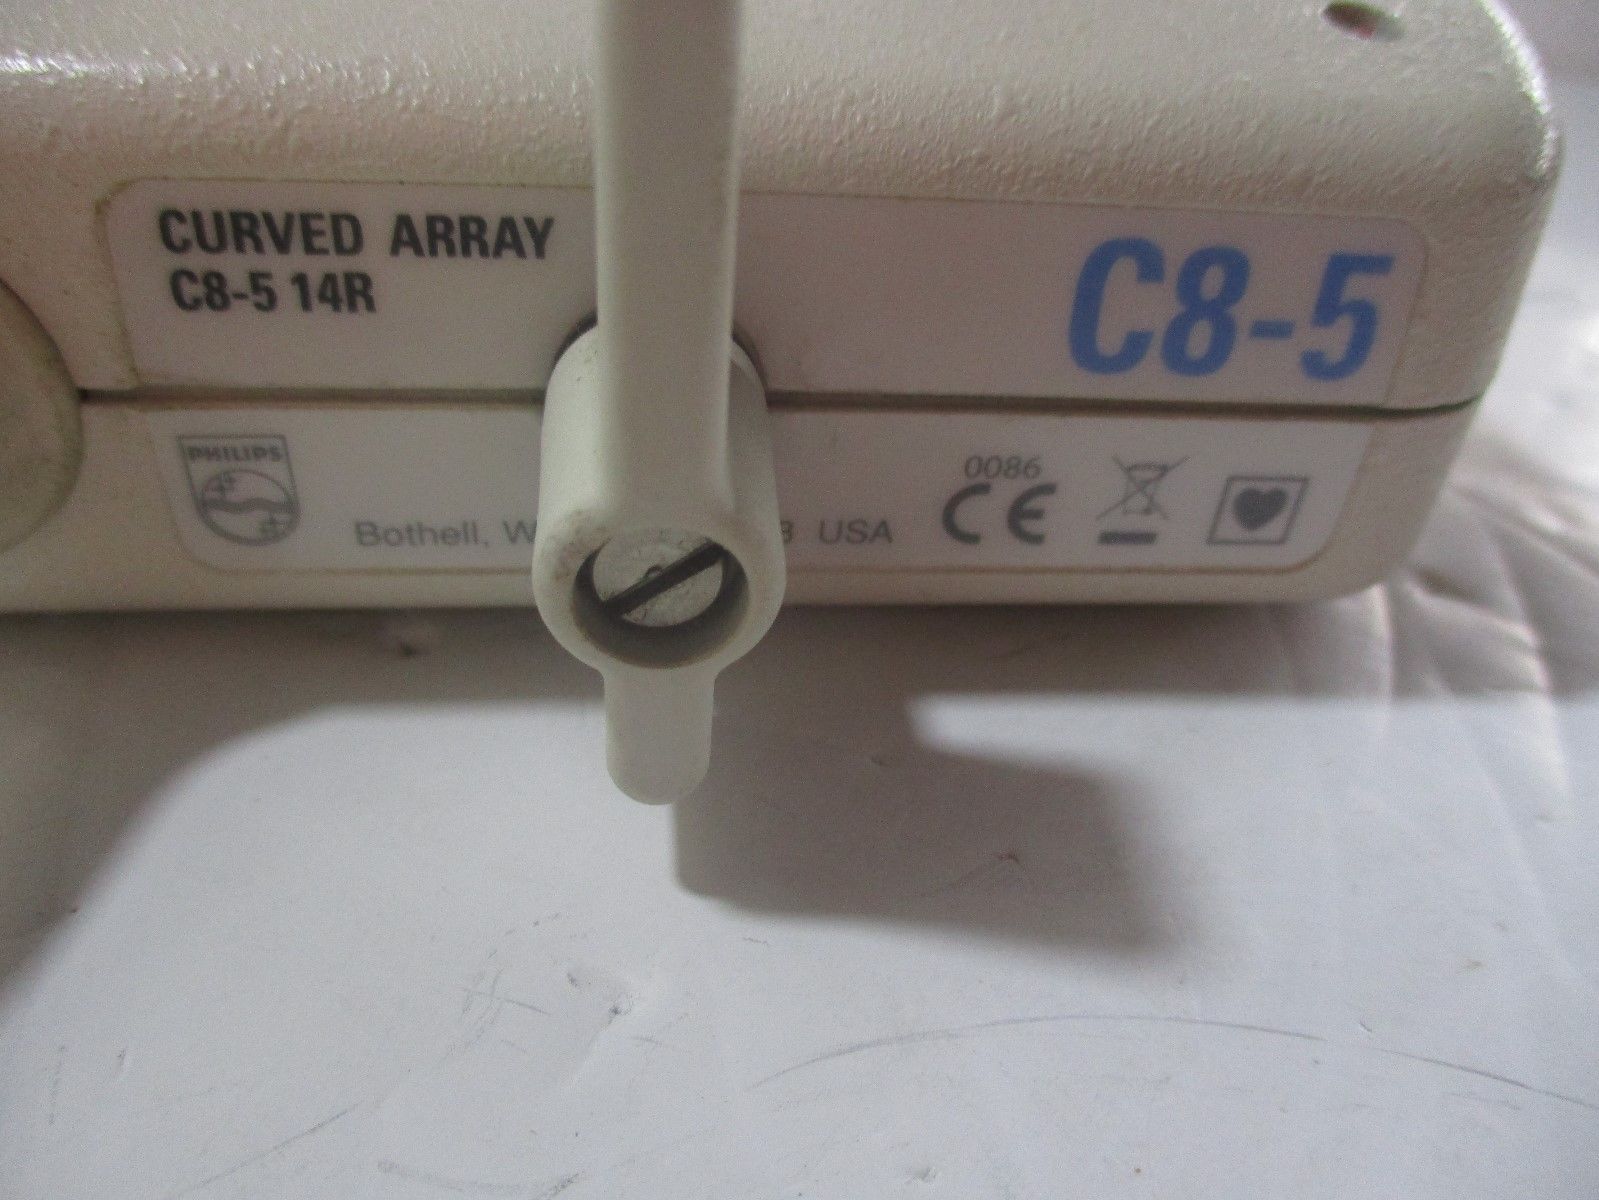 Philips / HP Agilent C8-5 14R Curved Array Ultrasound Transducer Probe